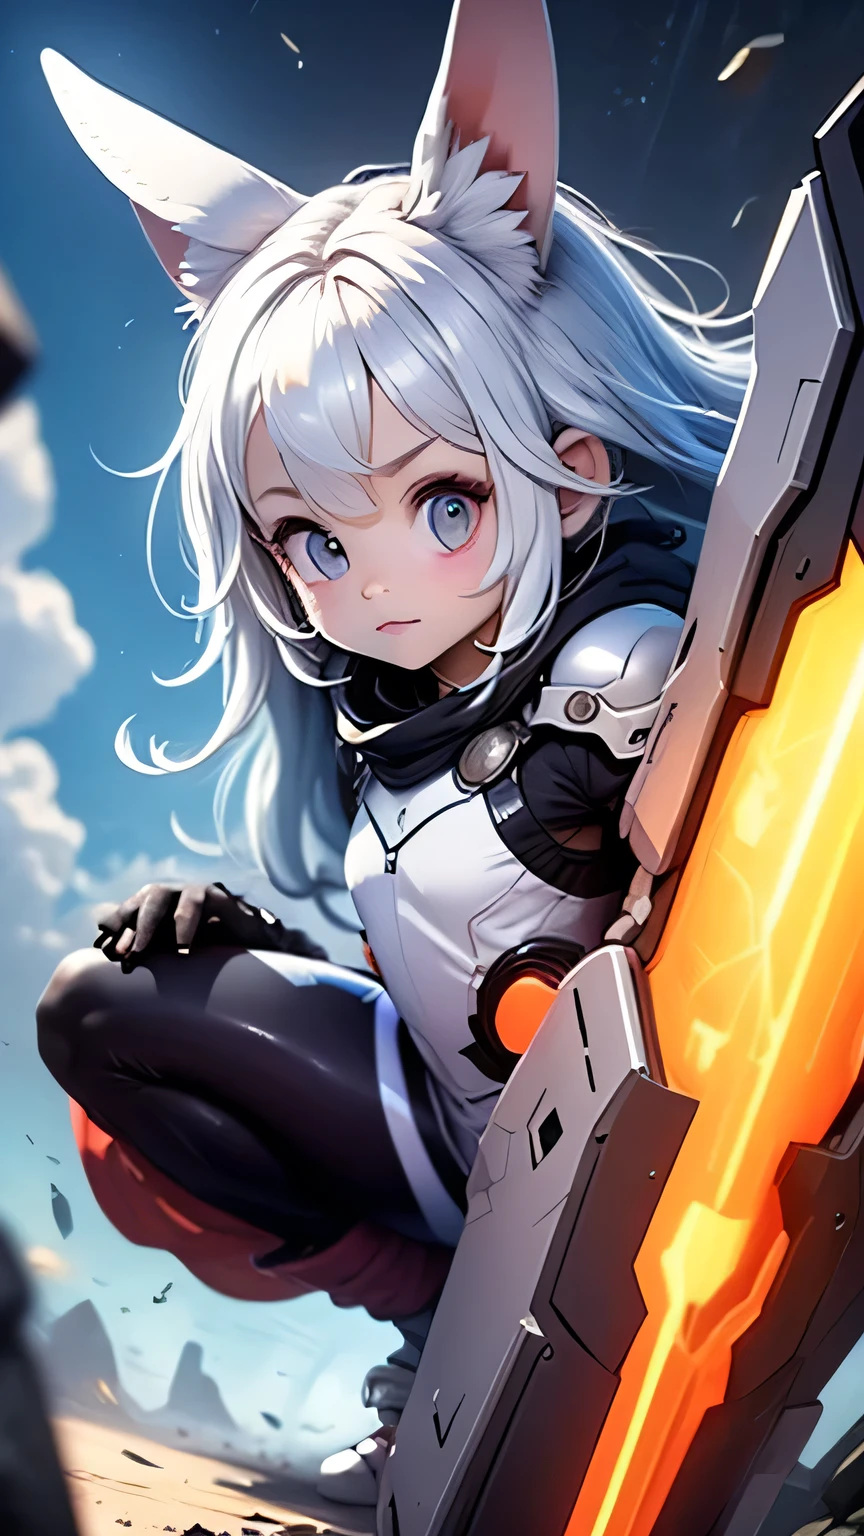 solo,1female\(chibi,cute,kawaii,small kid,(white hair:1.7),(very long hair:1.7),bangs,(ear\(fluffy white rabbit-ear\):1.3),(red eye),big eye,beautiful shiny eye,skin color white,big hairbow,(combat suit\((bodysuit:1.5),(skin tight:1.5),body suit,(very tight:1.5),weapons\)),(breast:1.3),fighting stance,dynamic pose,shooting and aiming a laser gun to viewer,(flying)\), BREAK ,background\(in the sky\), BREAK ,quality\(8k,wallpaper of extremely detailed CG unit, ​masterpiece,hight resolution,top-quality,top-quality real texture skin,hyper realisitic,increase the resolution,RAW photos,best qualtiy,highly detailed,the wallpaper,golden ratio\),dynamic angle,better hands,[nsfw:2.0]